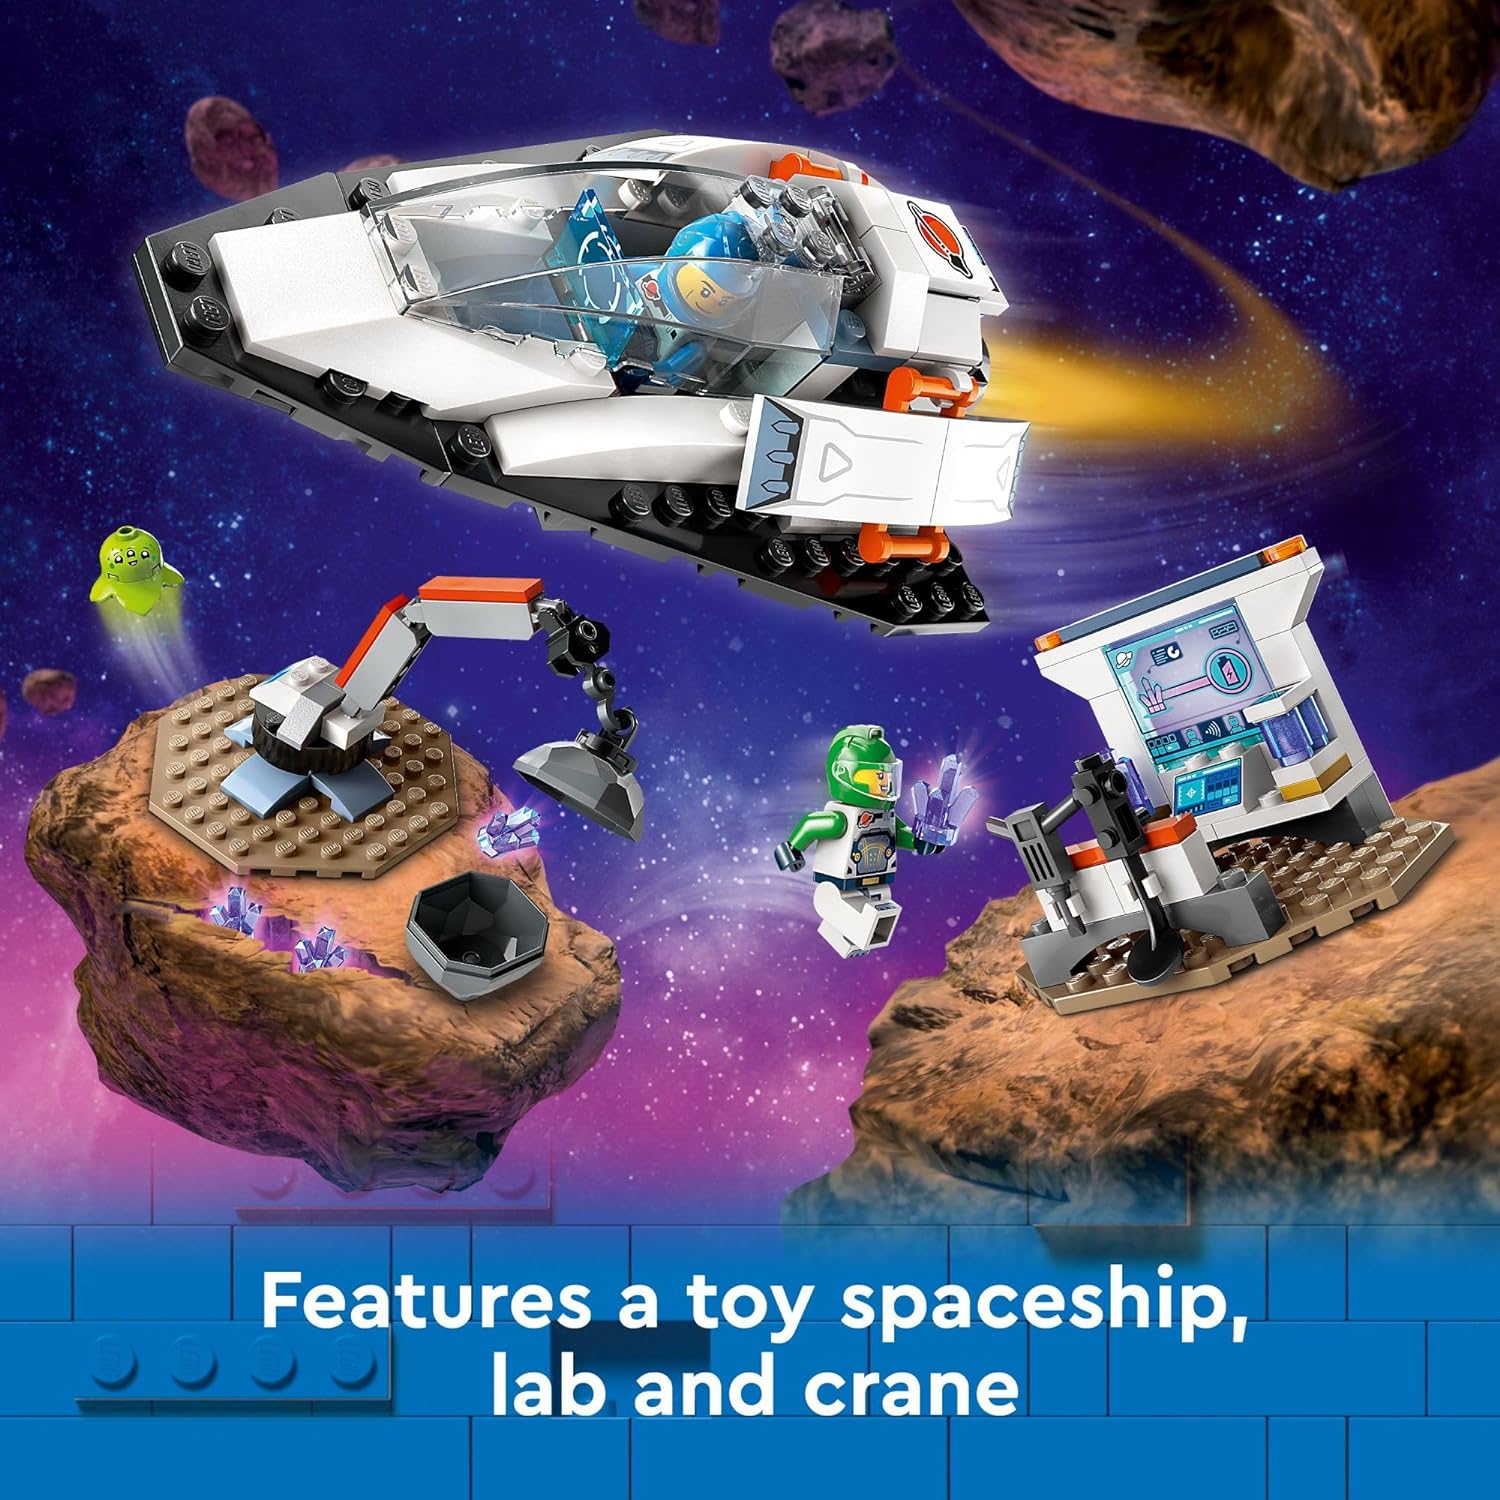 LEGO 60429 City Spaceship and Asteroid Discovery Toy Building Set, Gift for Kids Ages 4 Years Old and Up who Love Pretend Play, Includes 2 Space Crew Minifigures, Alien, Crystals, and Crane Toy